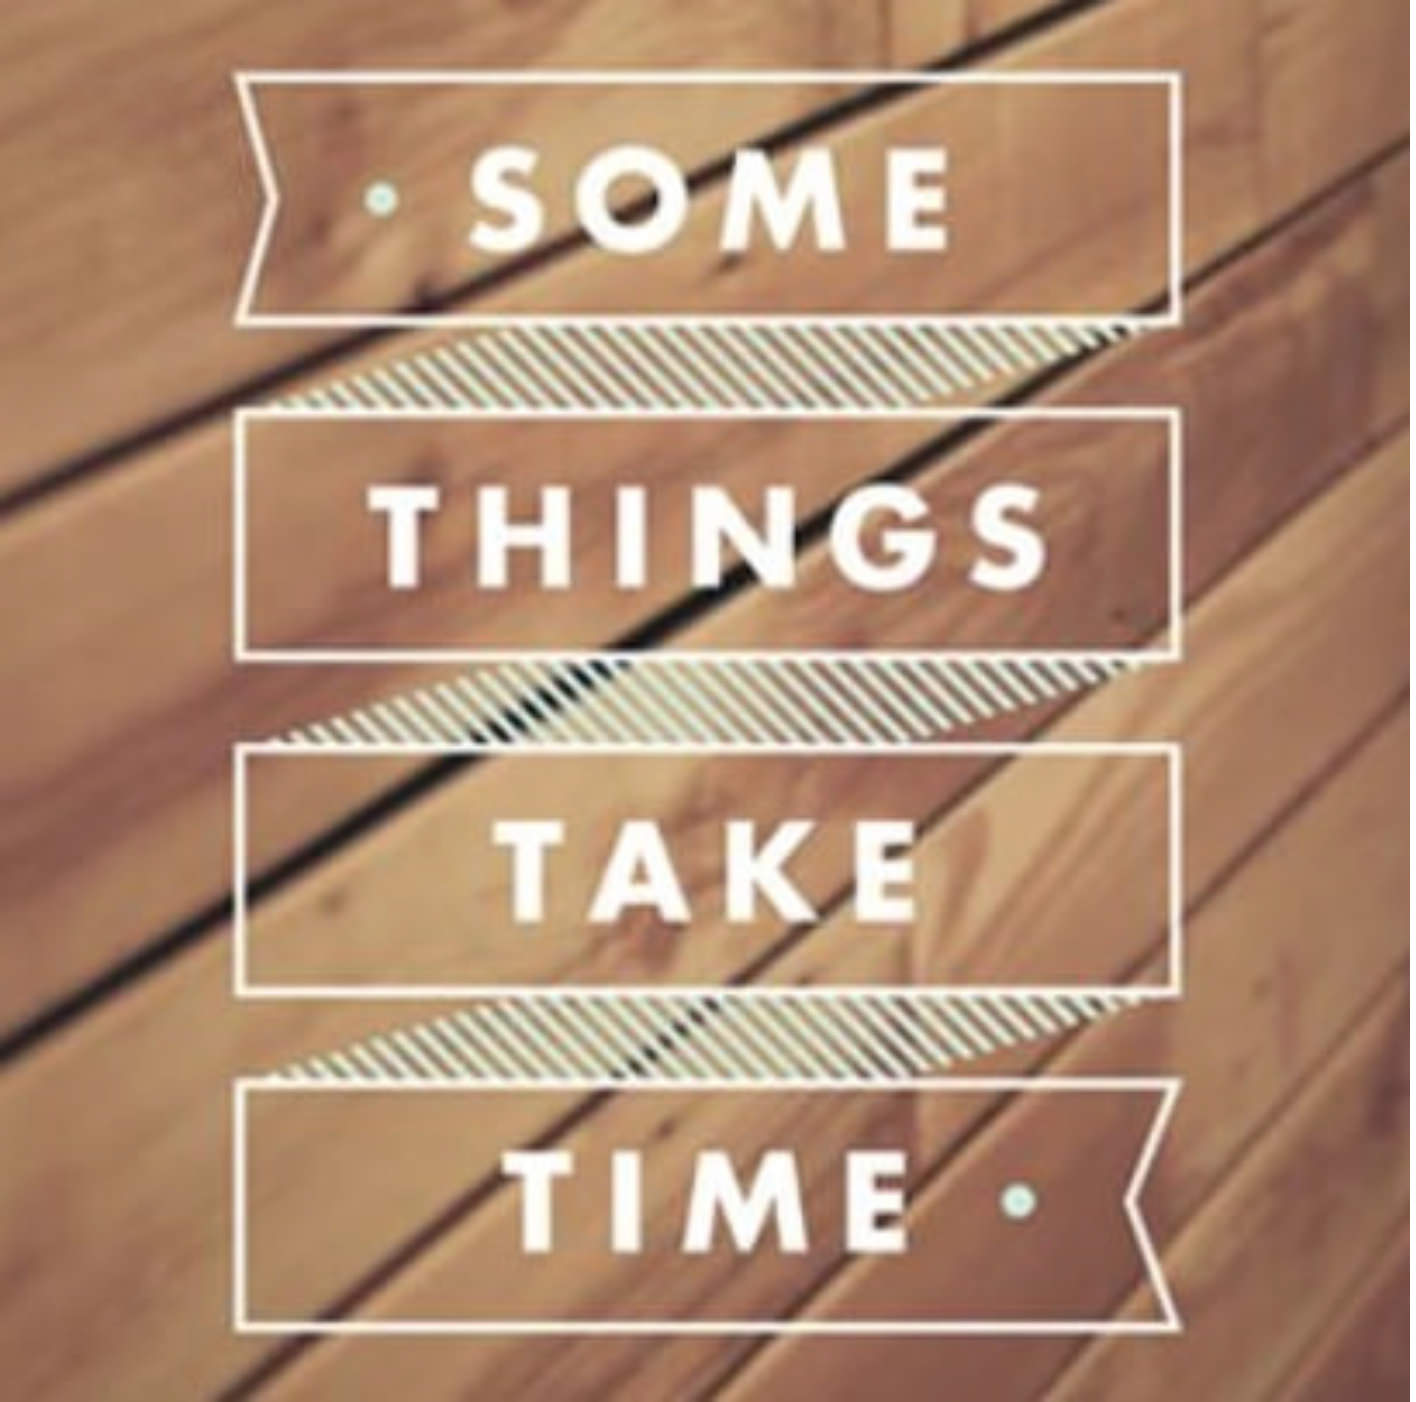 somethings take time - Living Fit Lifestyle